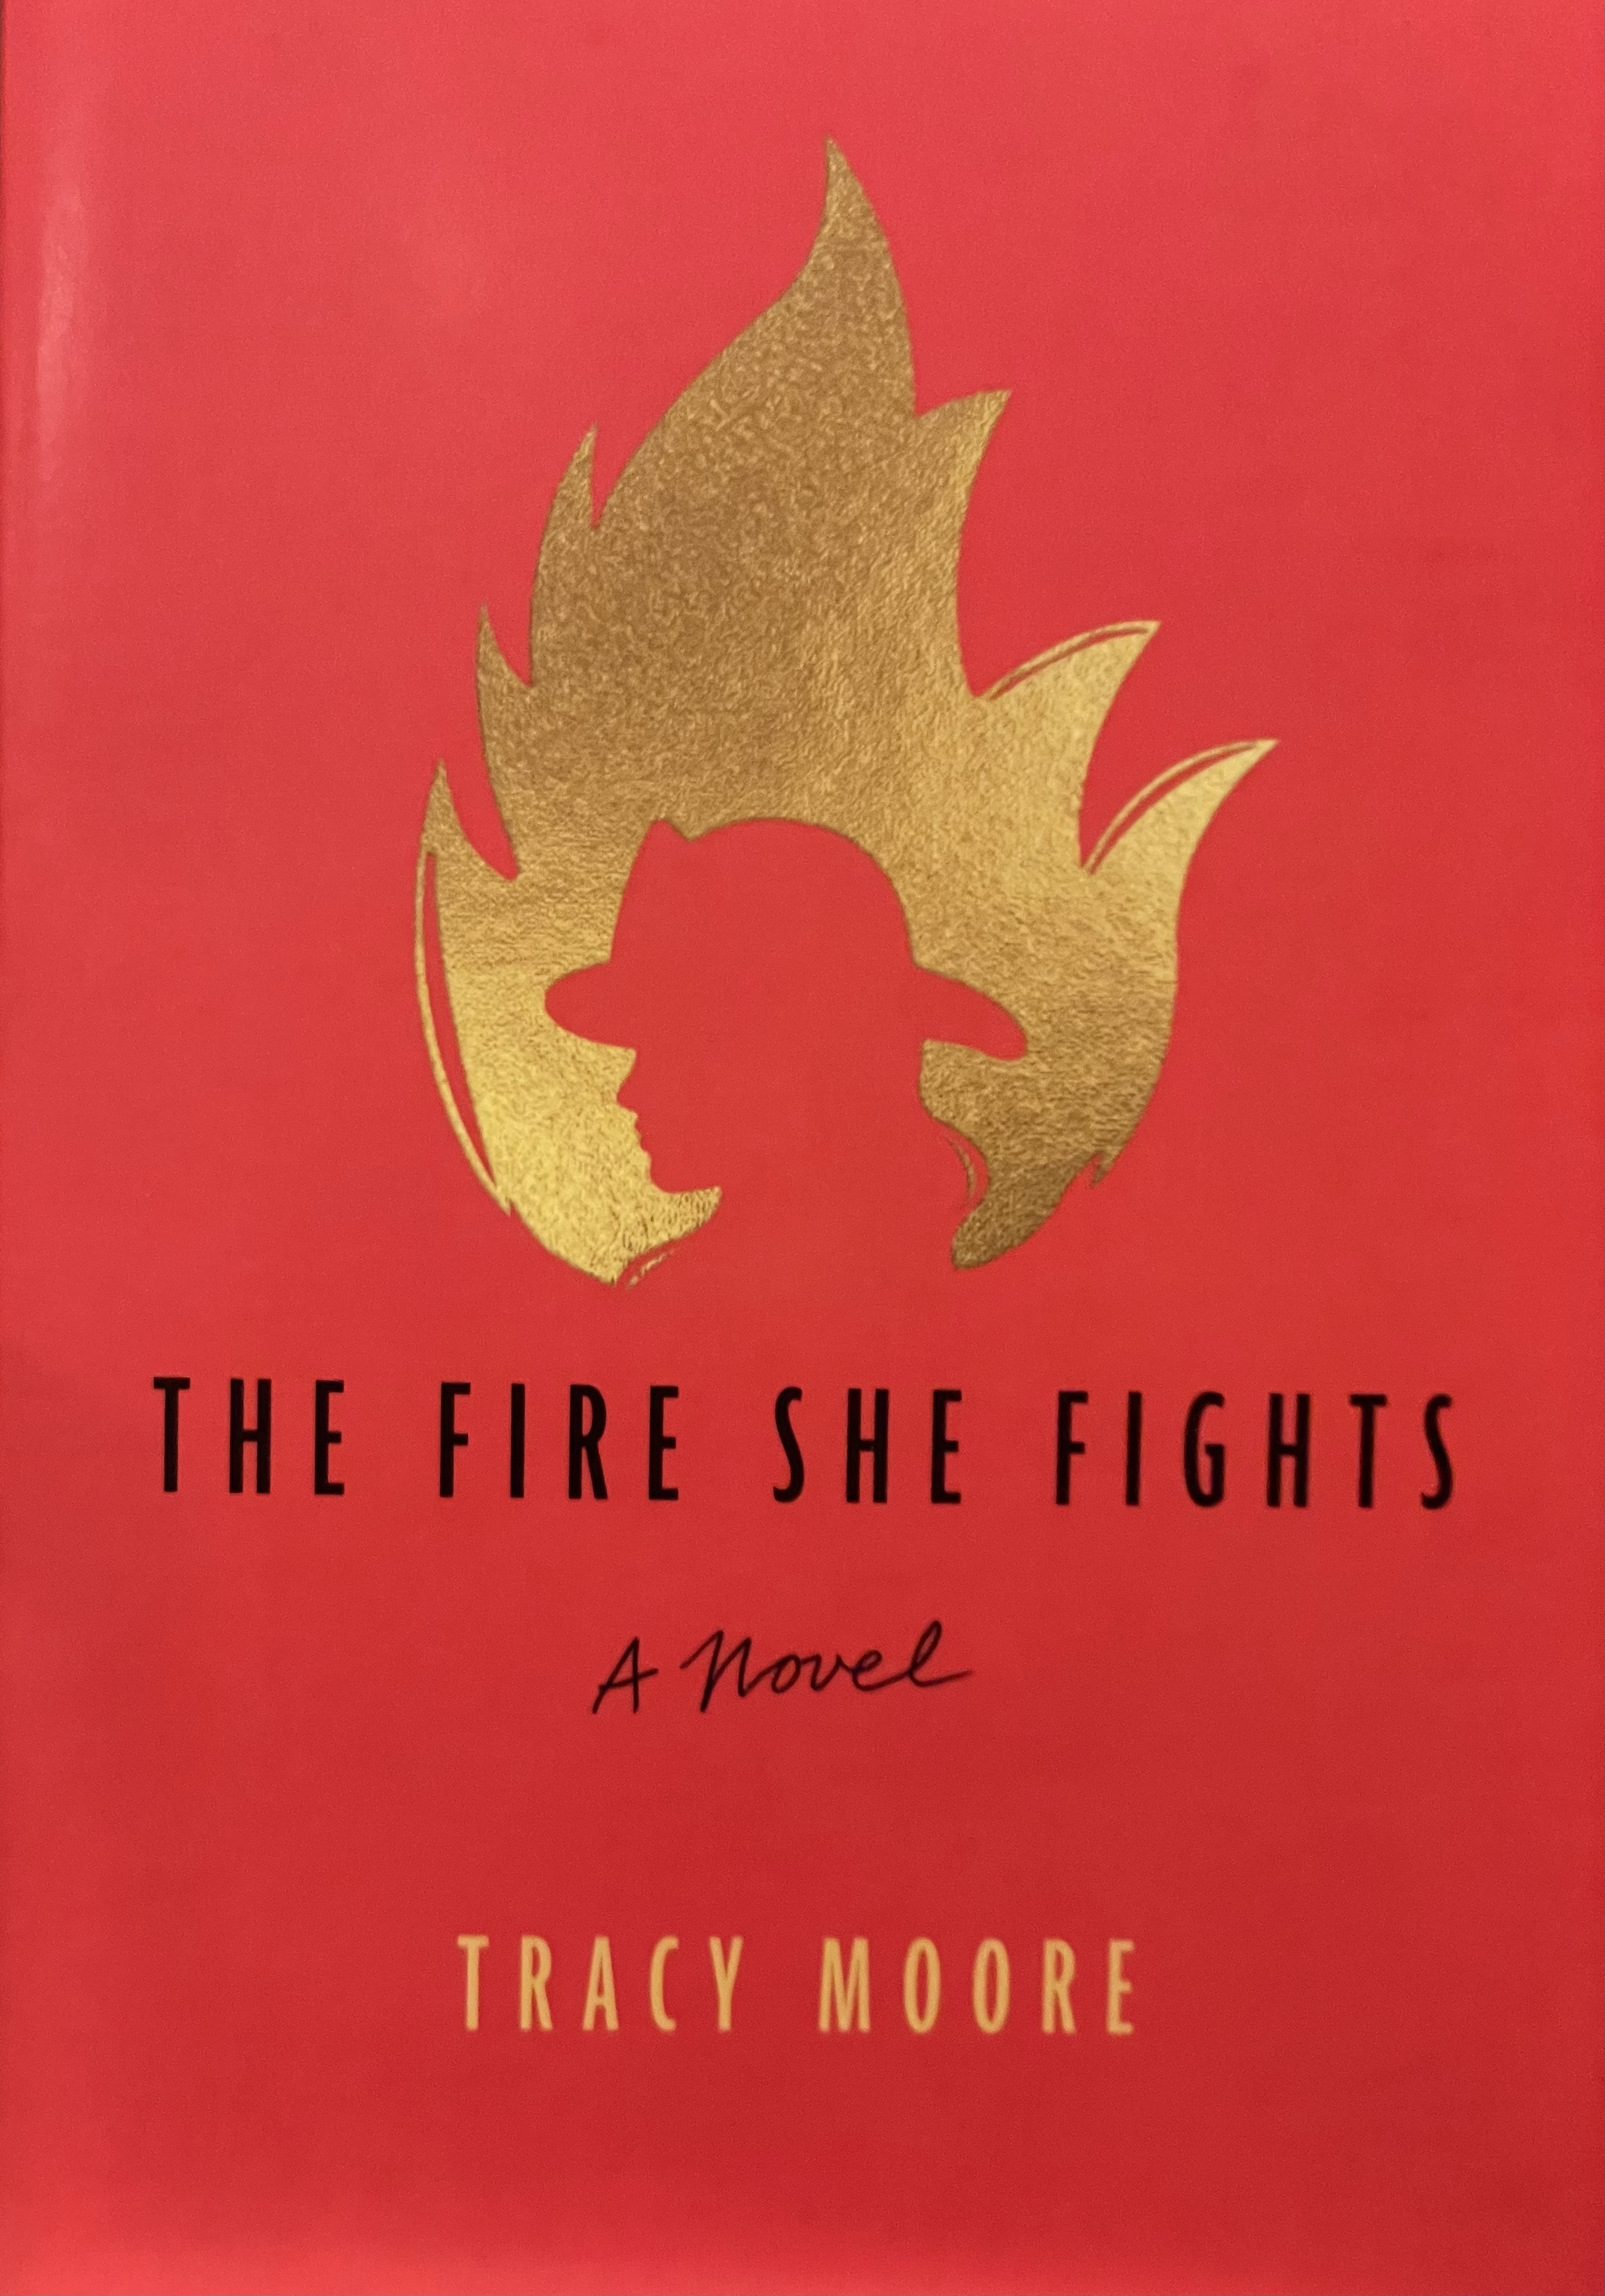 Cover of the novel The Fire She Fights. Red with a gold flame and a sillouette of a firefighters.